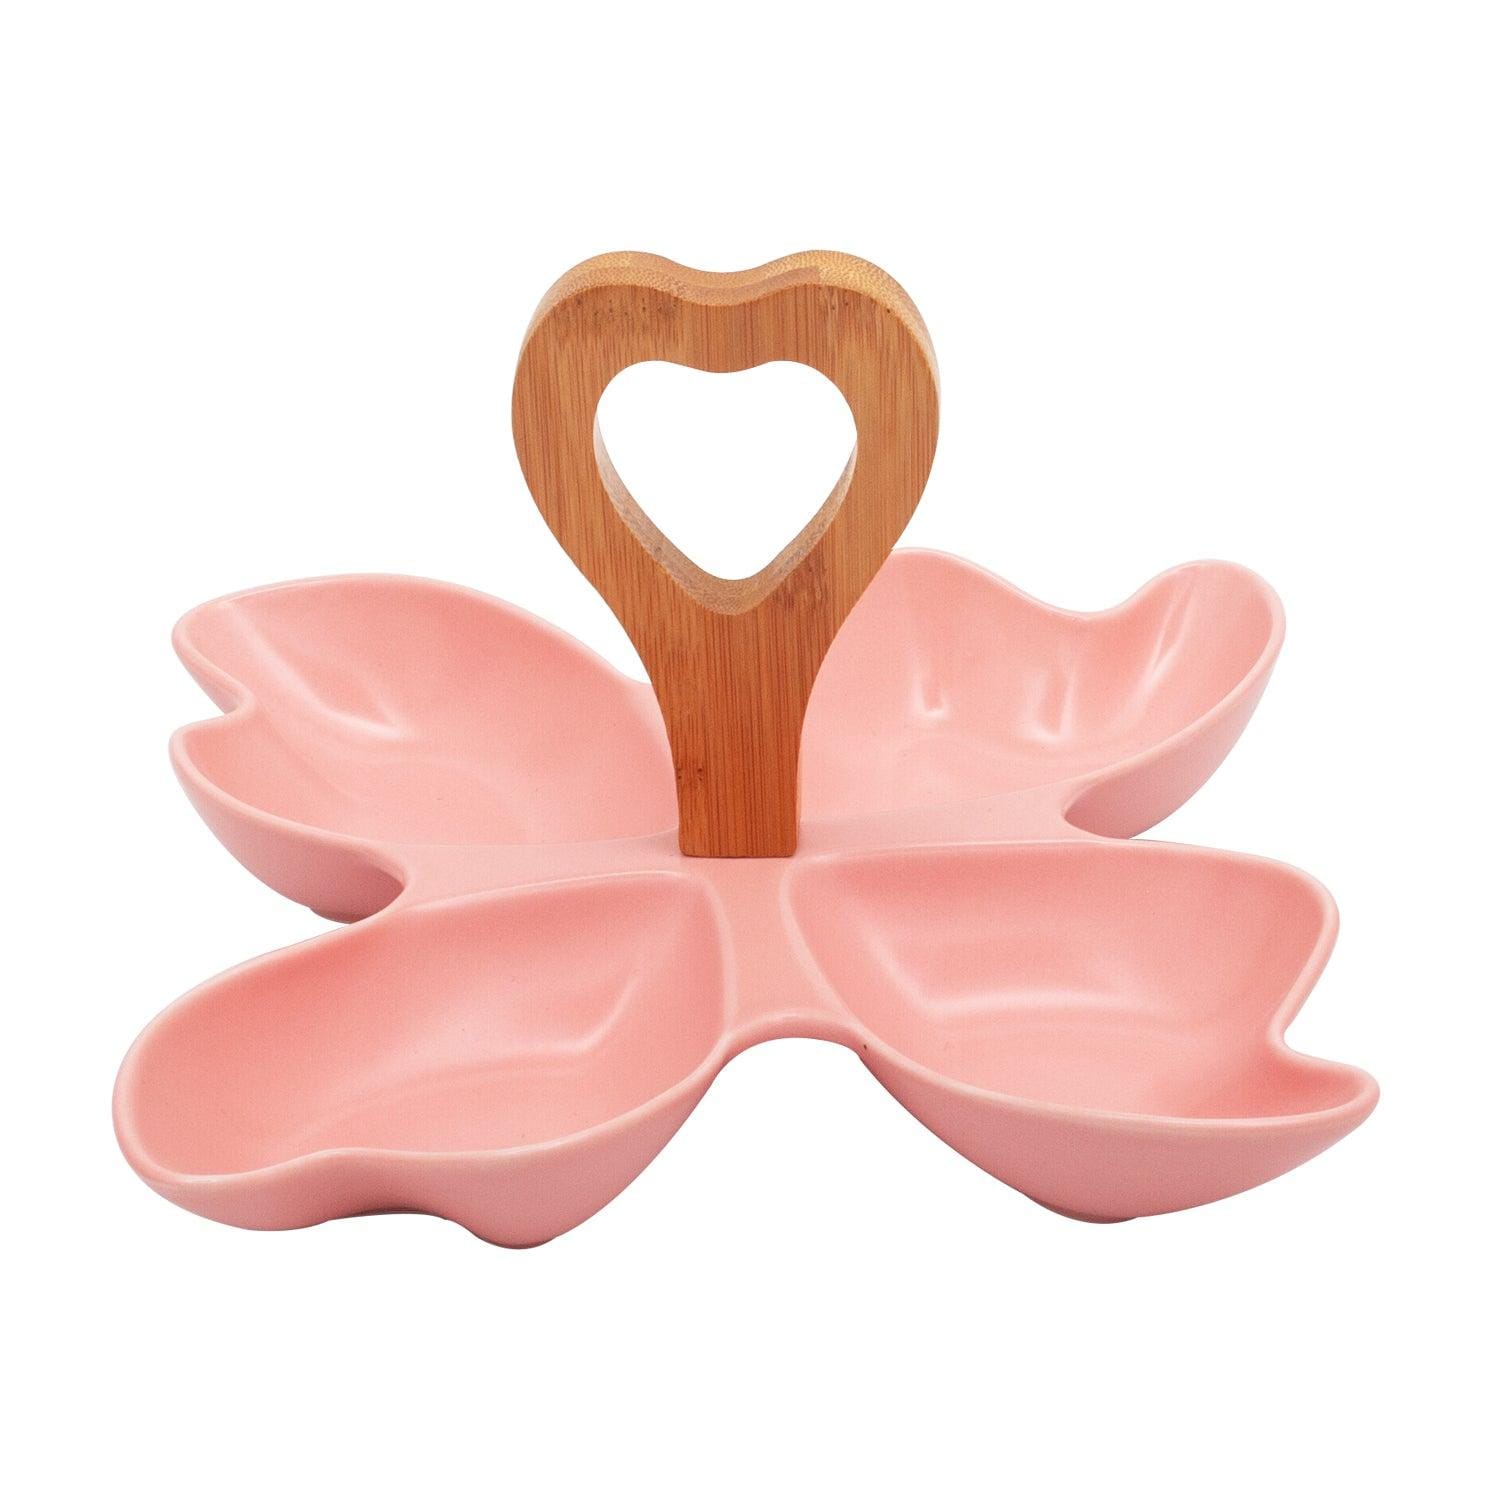 4 Compartment Leafy Pink Ceramic Serving Platter with Wooden Handle